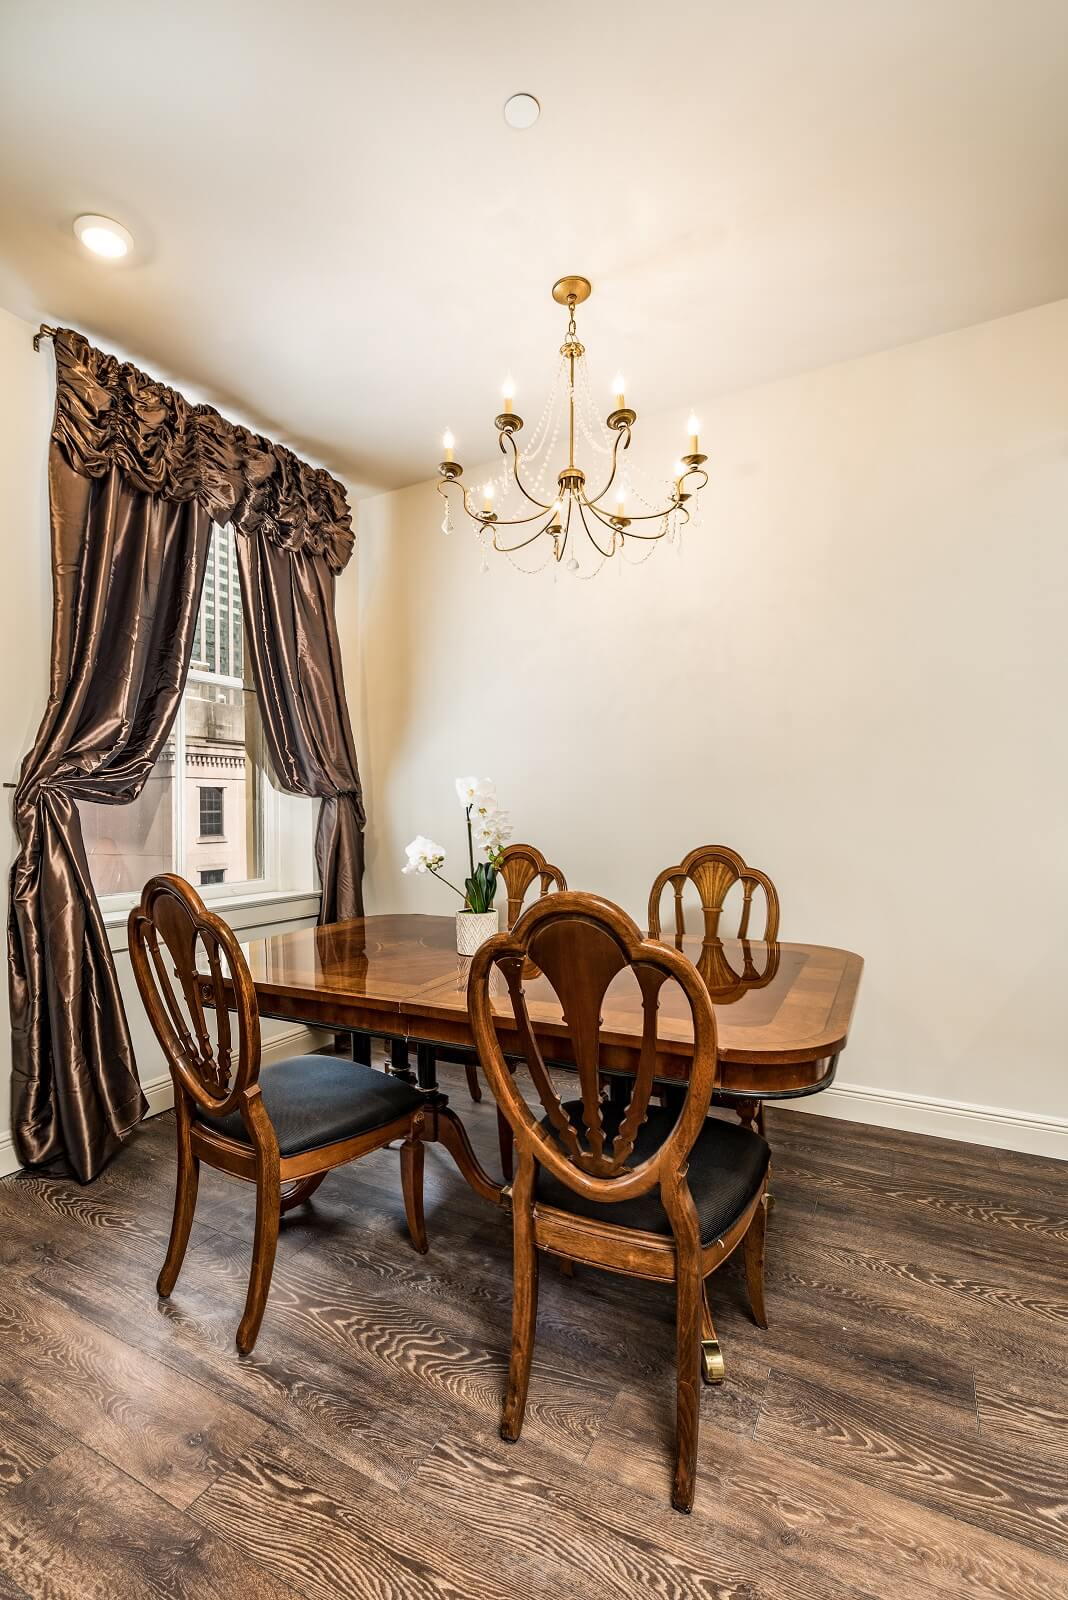 The Alexandre Unit 401 dining room, a New Orleans luxury rental.